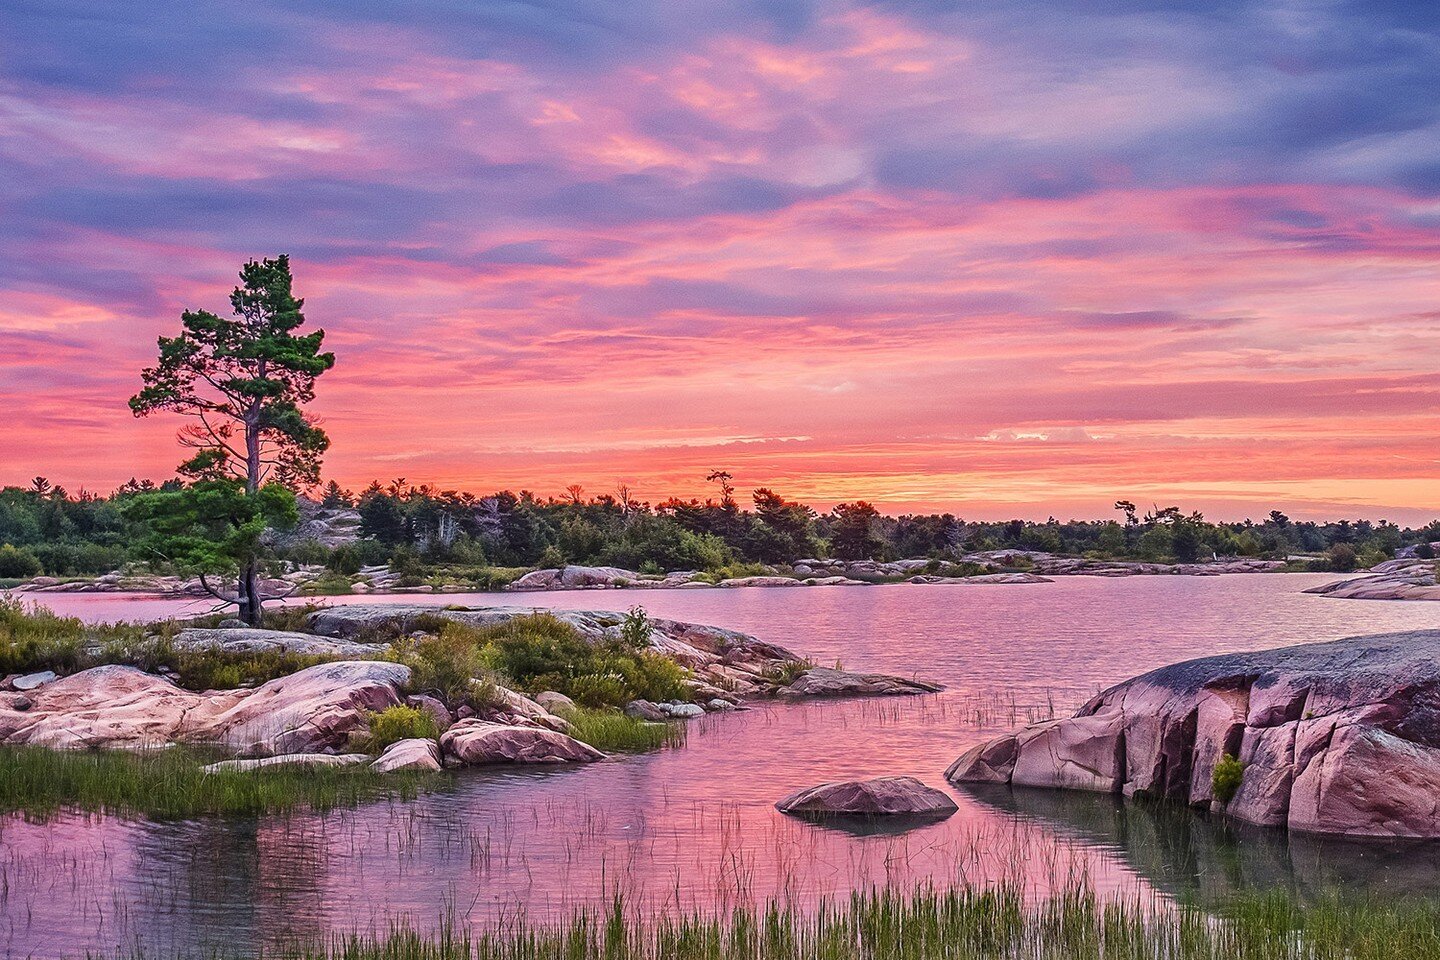 Sunrise over the pink granite islands in Georgian Bay, Ontario, just south of Killarney Provincial Park. 

https://postly.link/s5O/

#killarney #killarneyon #killarneyprovincialpark #georgianbay #killarneyontario #ontario #yourstodiscover #ontariopri